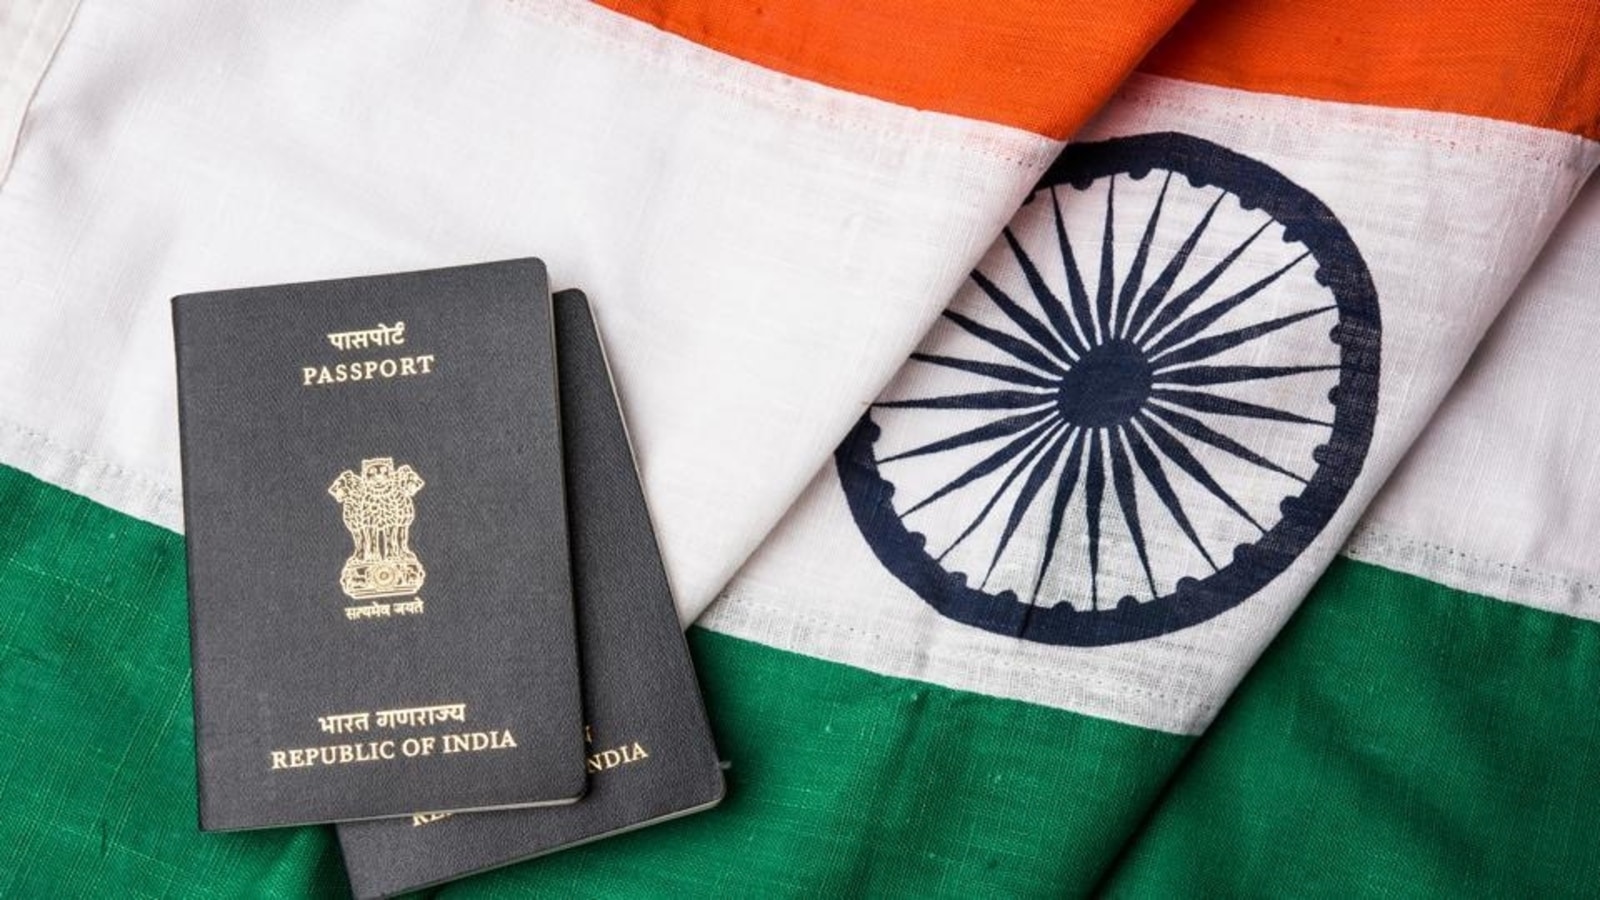 visa free travel for indian citizens